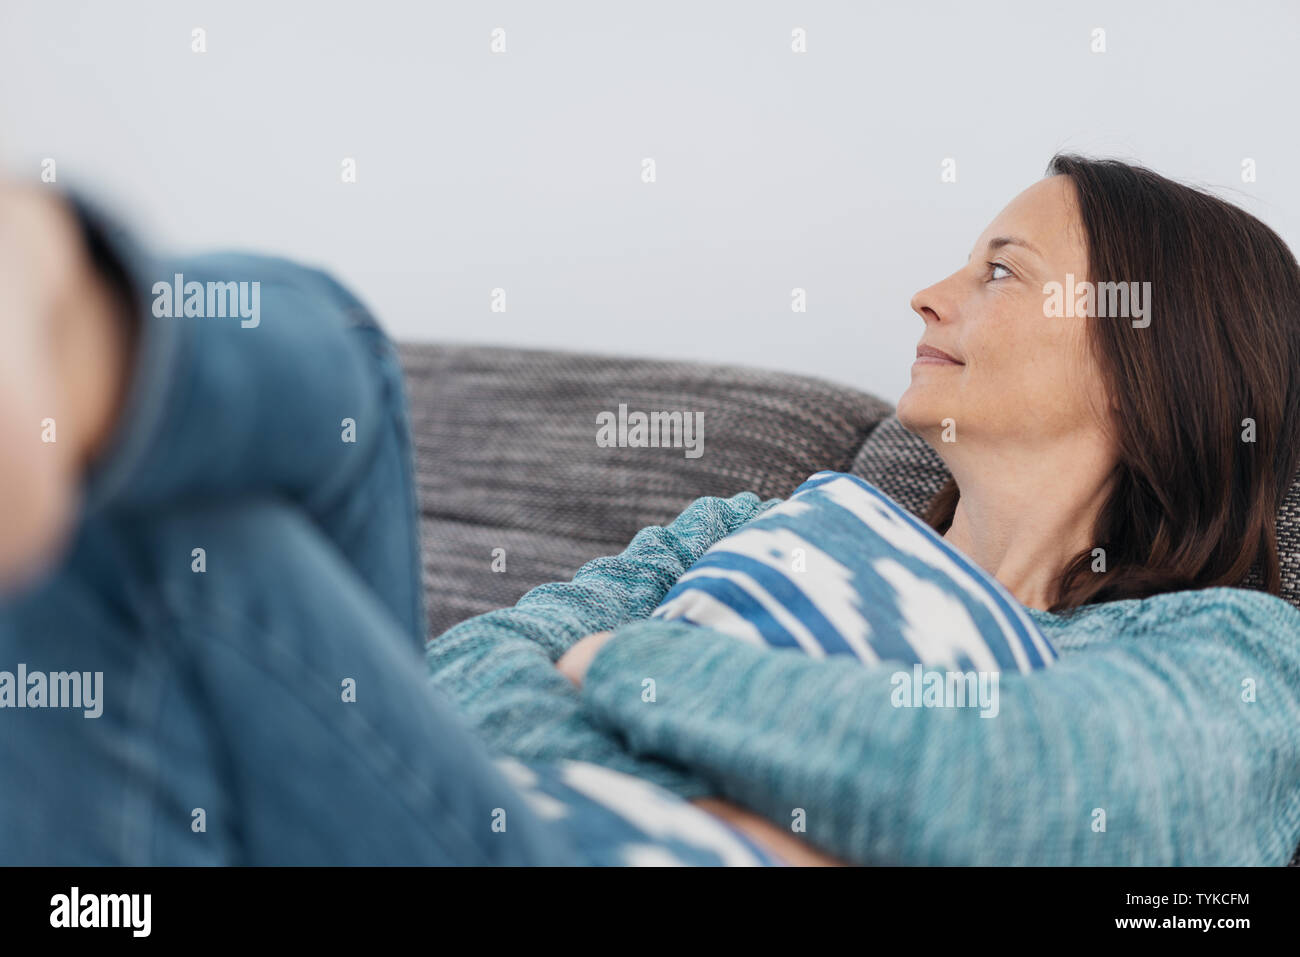 Adult smiling woman holding blue and white striped pillow with both arms while sitting back on couch Stock Photo